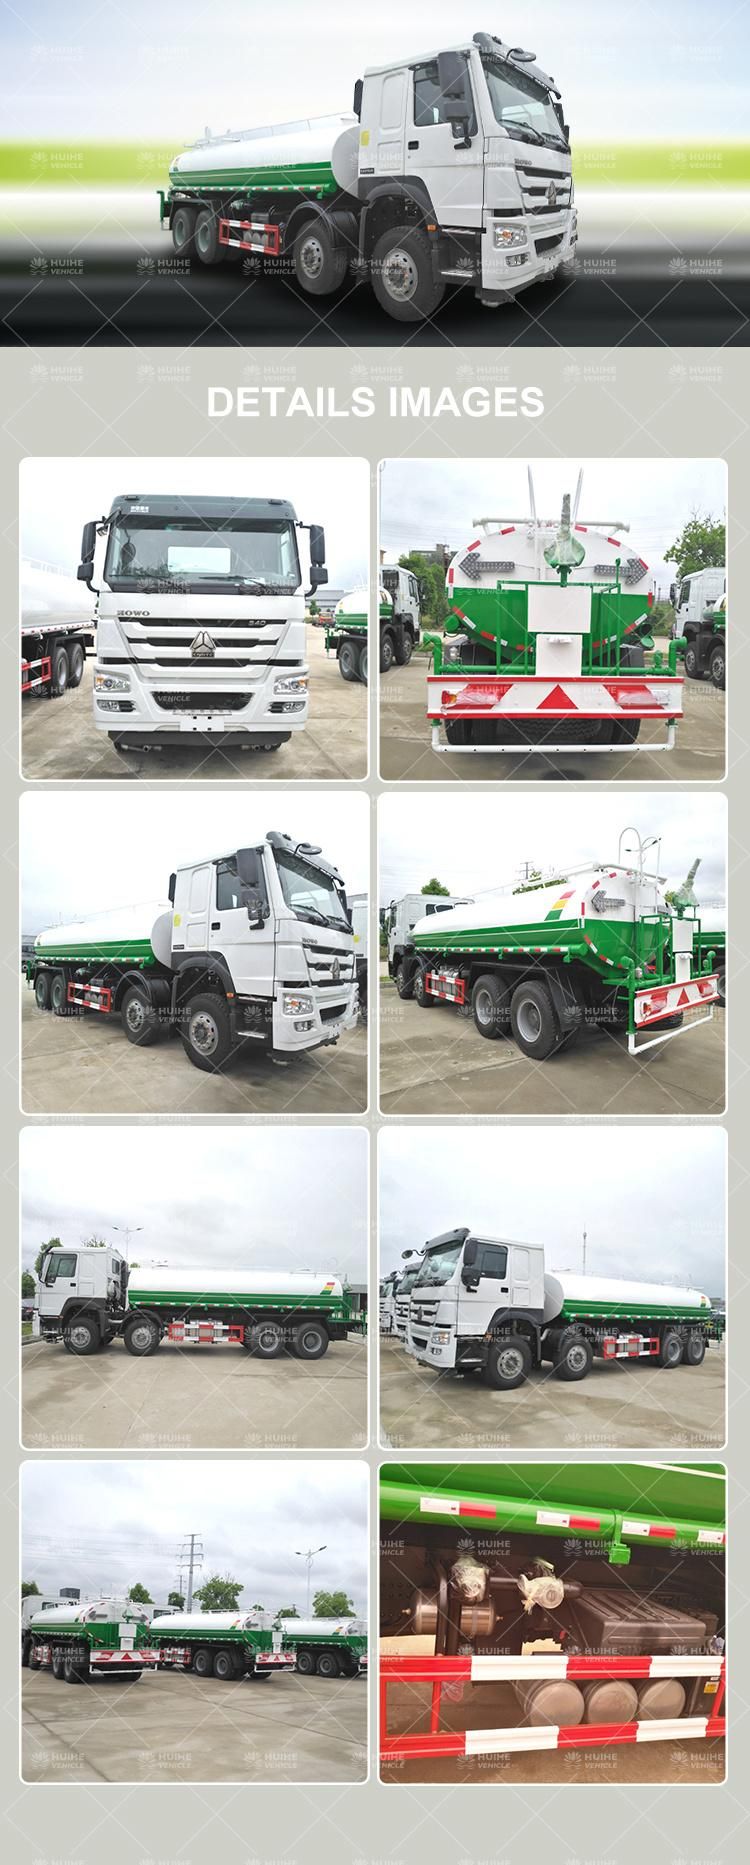 Sinotruk HOWO Water Tanker Used Tankers with Good Conditional From China